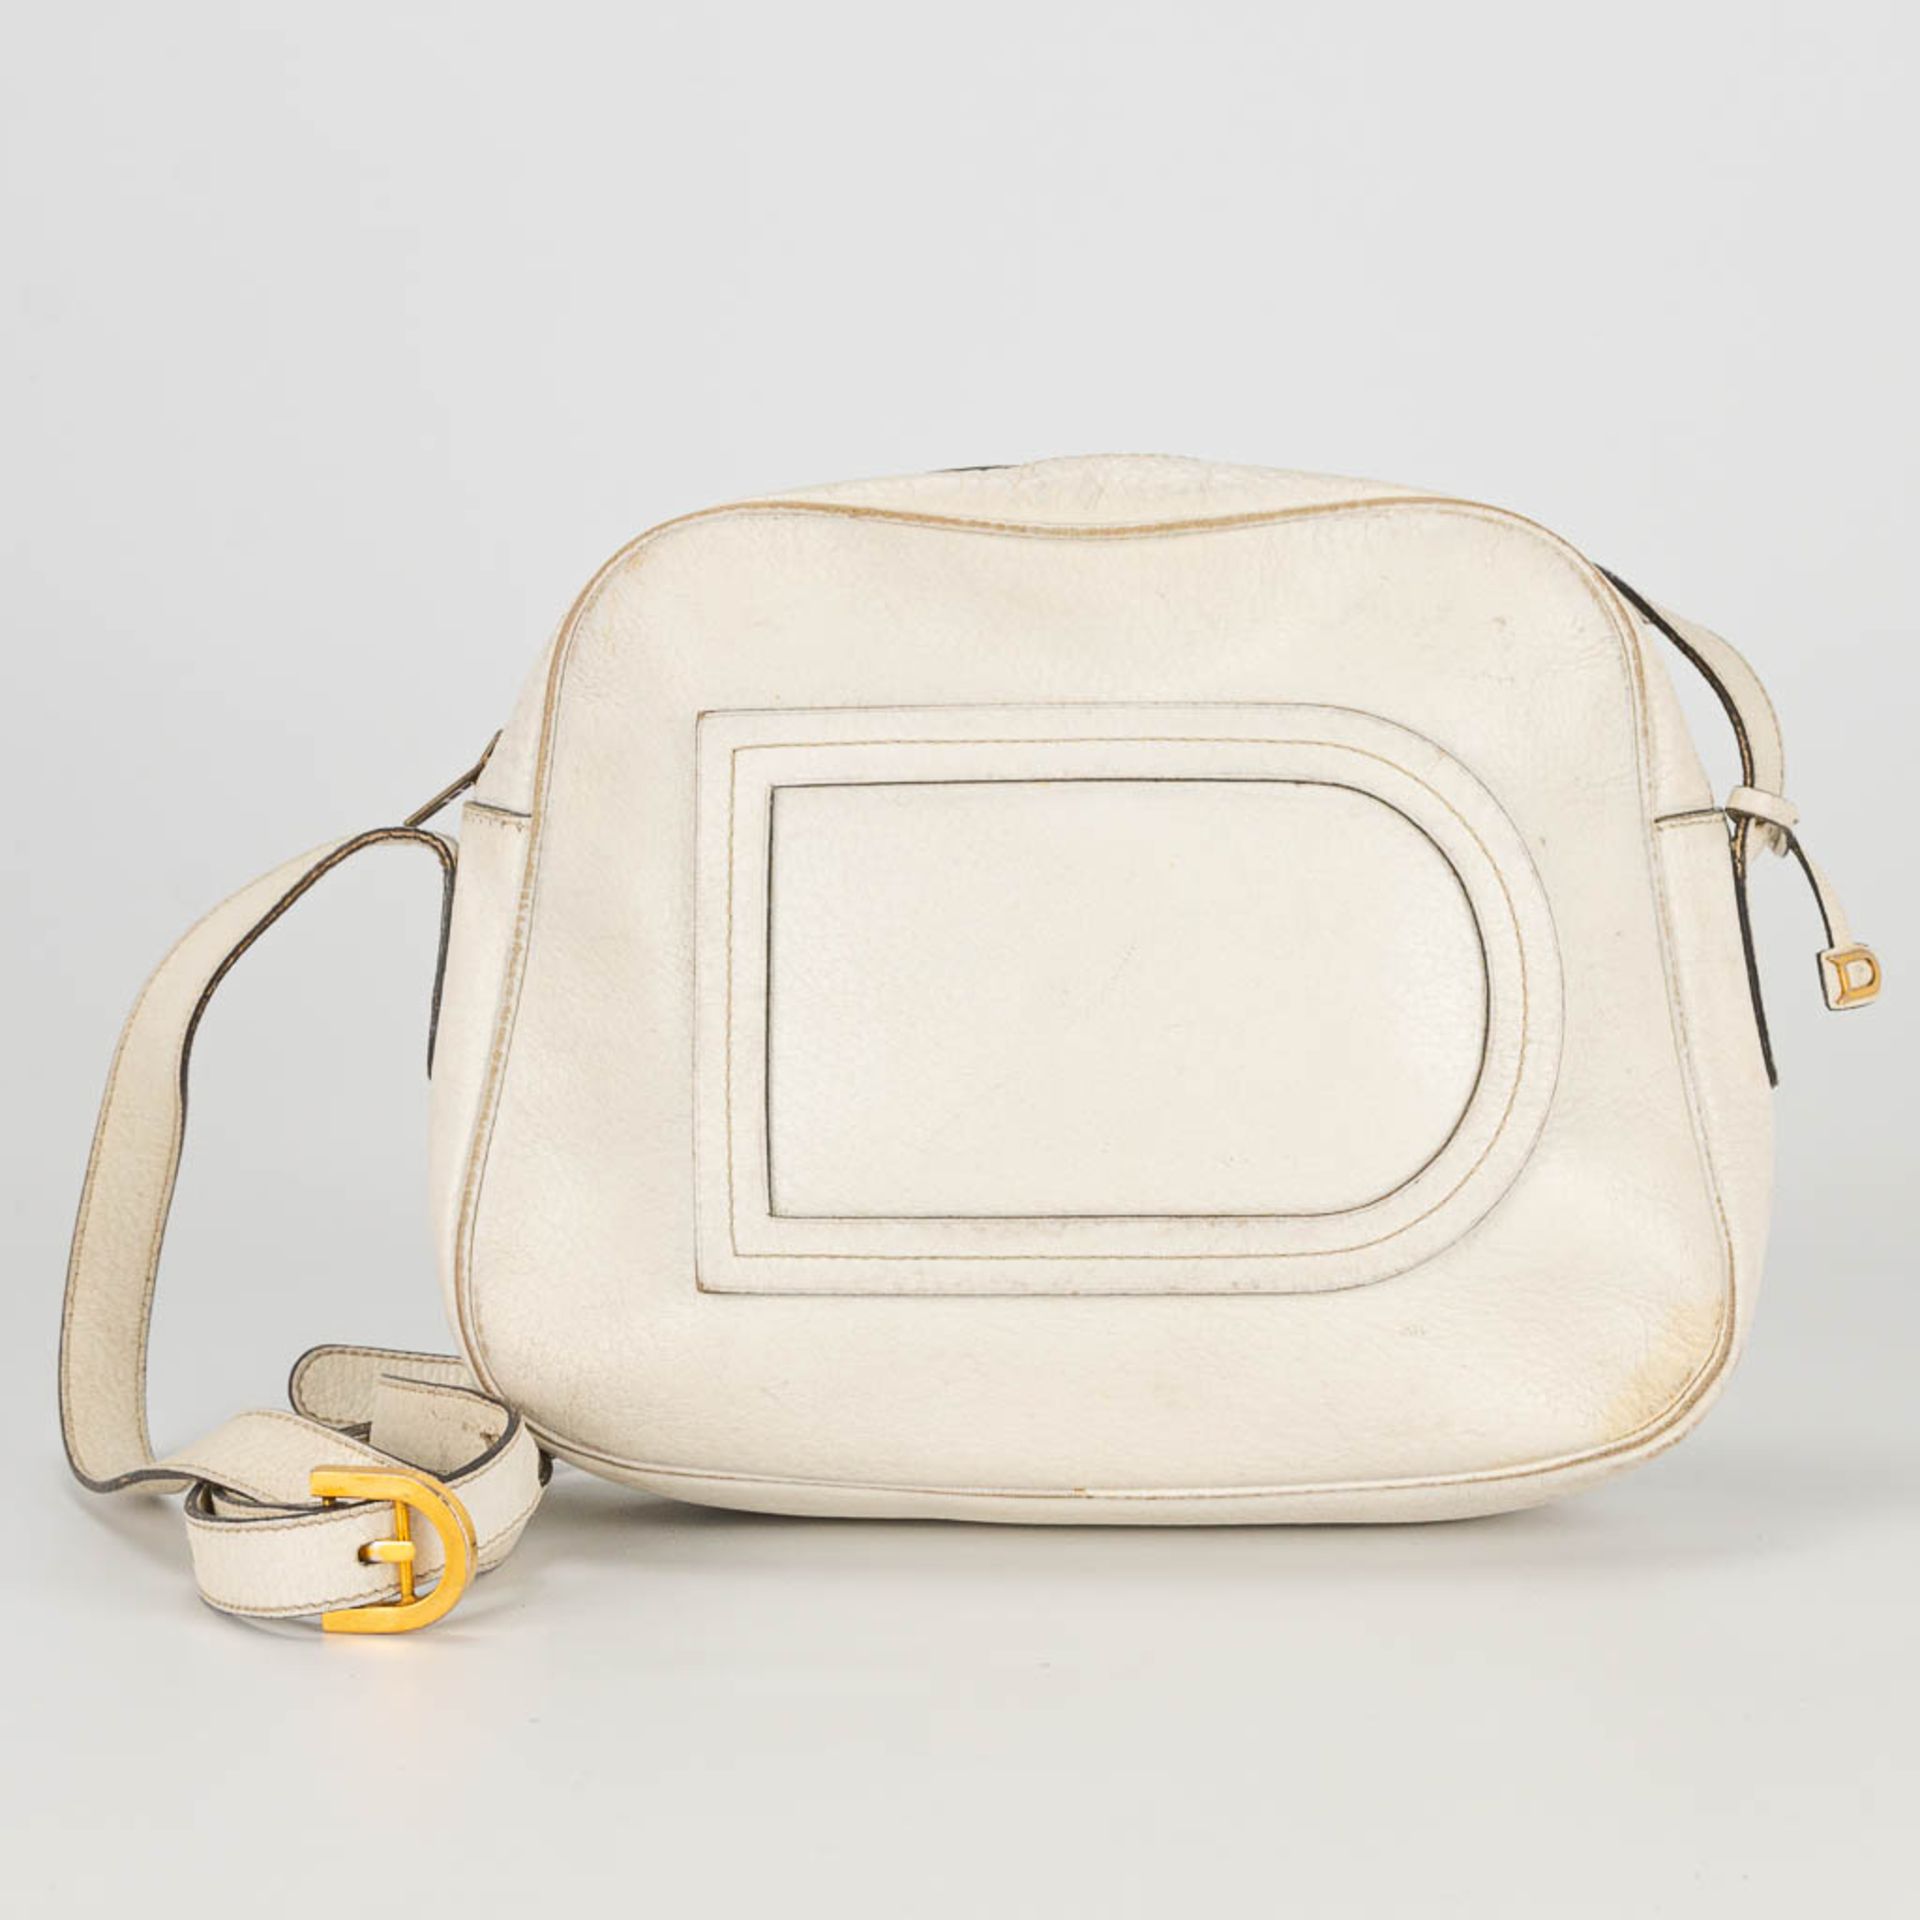 A purse made of white leather and marked Delvaux